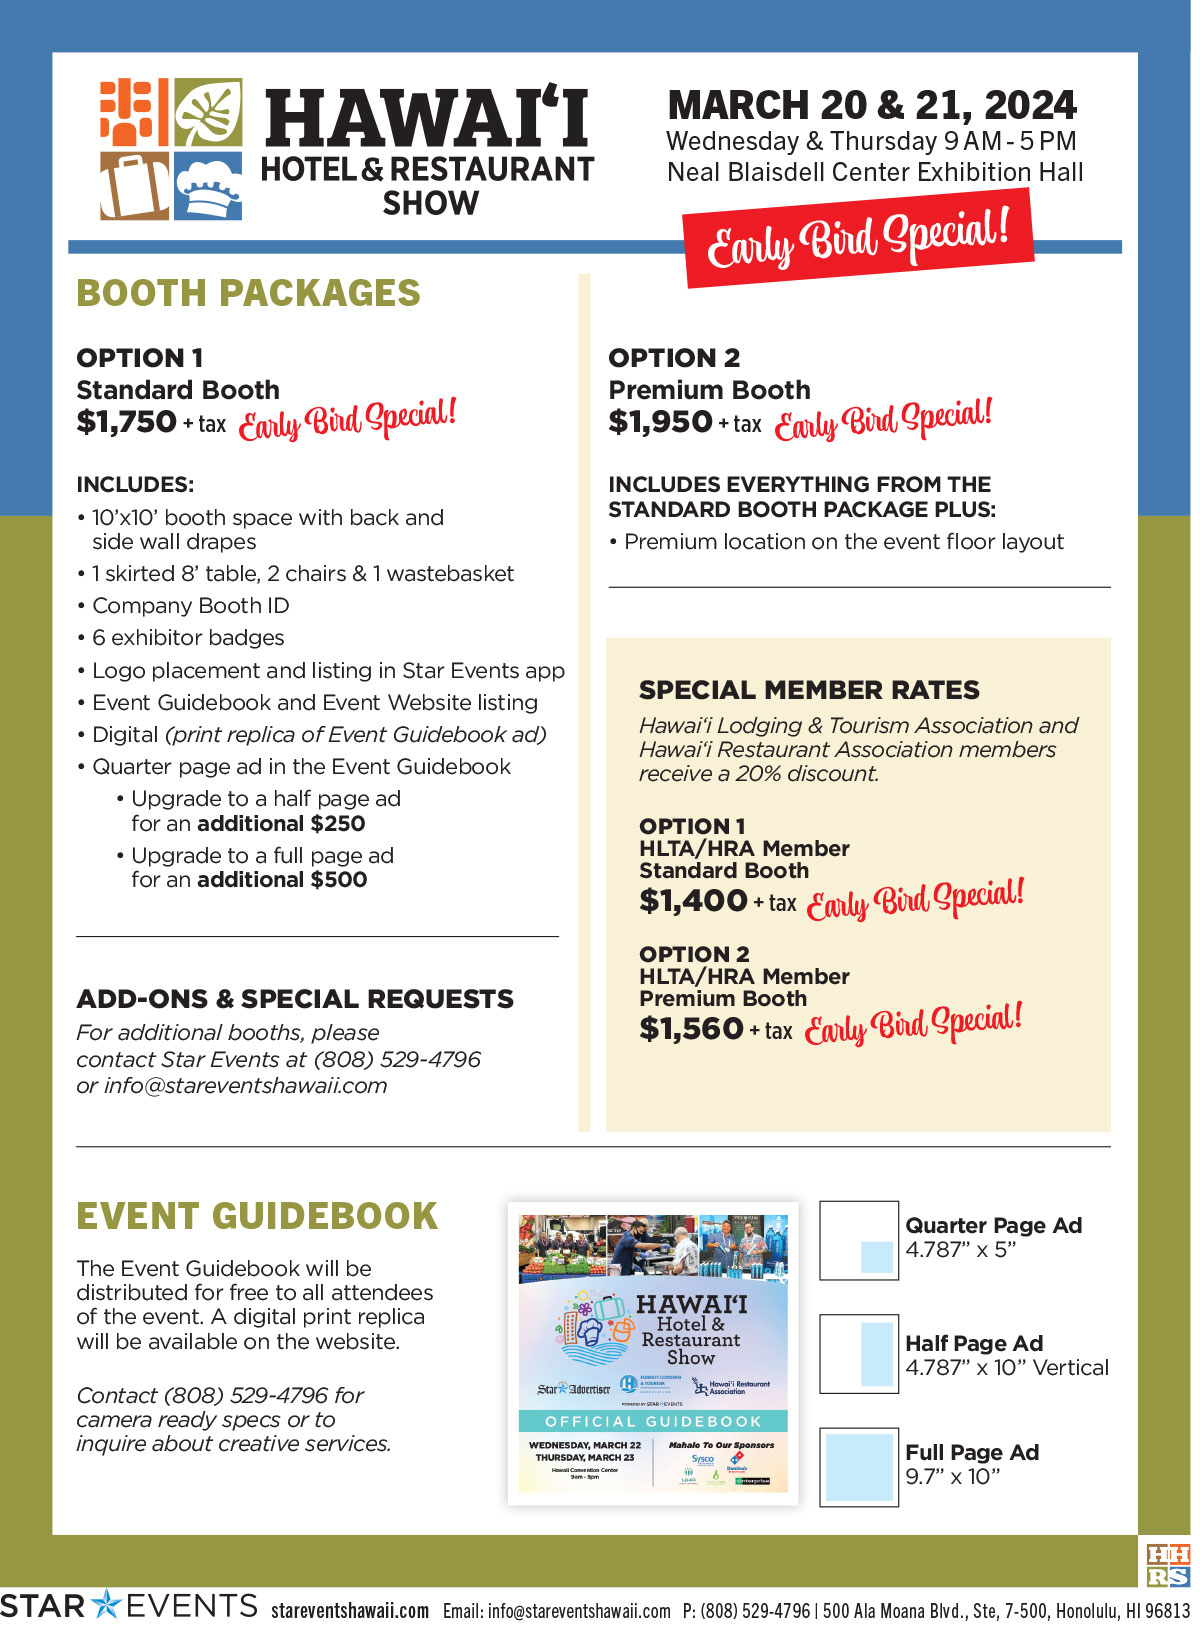 Booth packages